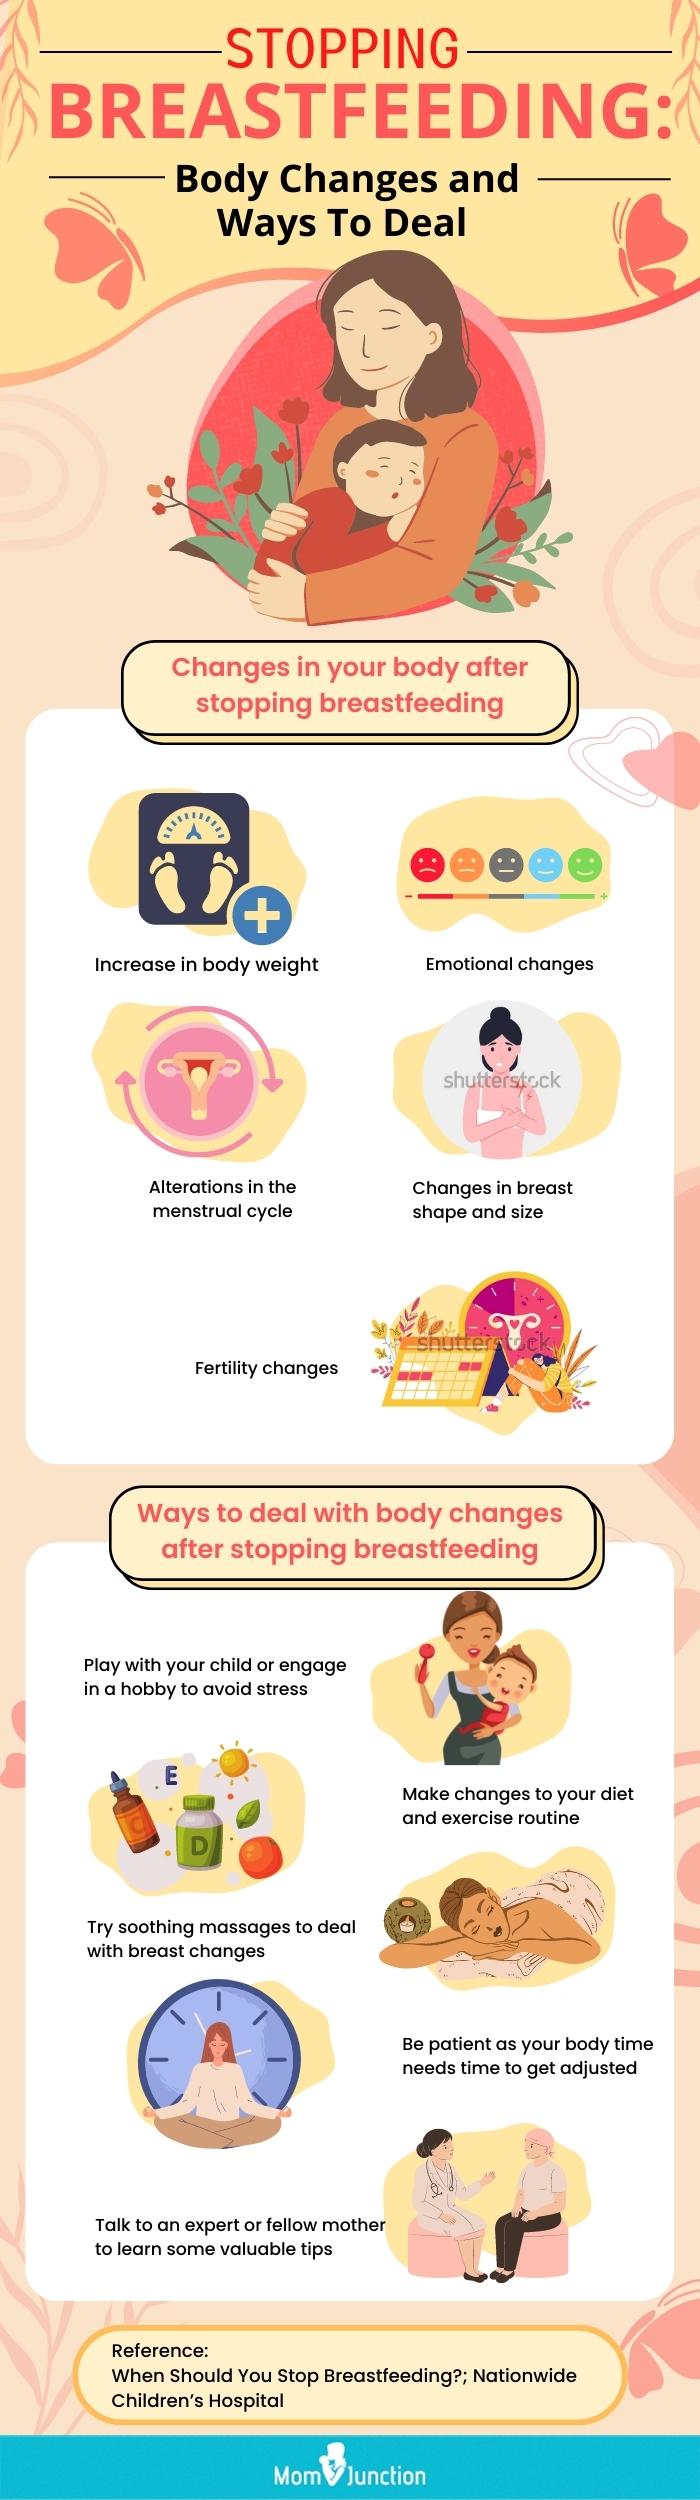 stopping breastfeeding body changes and ways to deal (infographic)